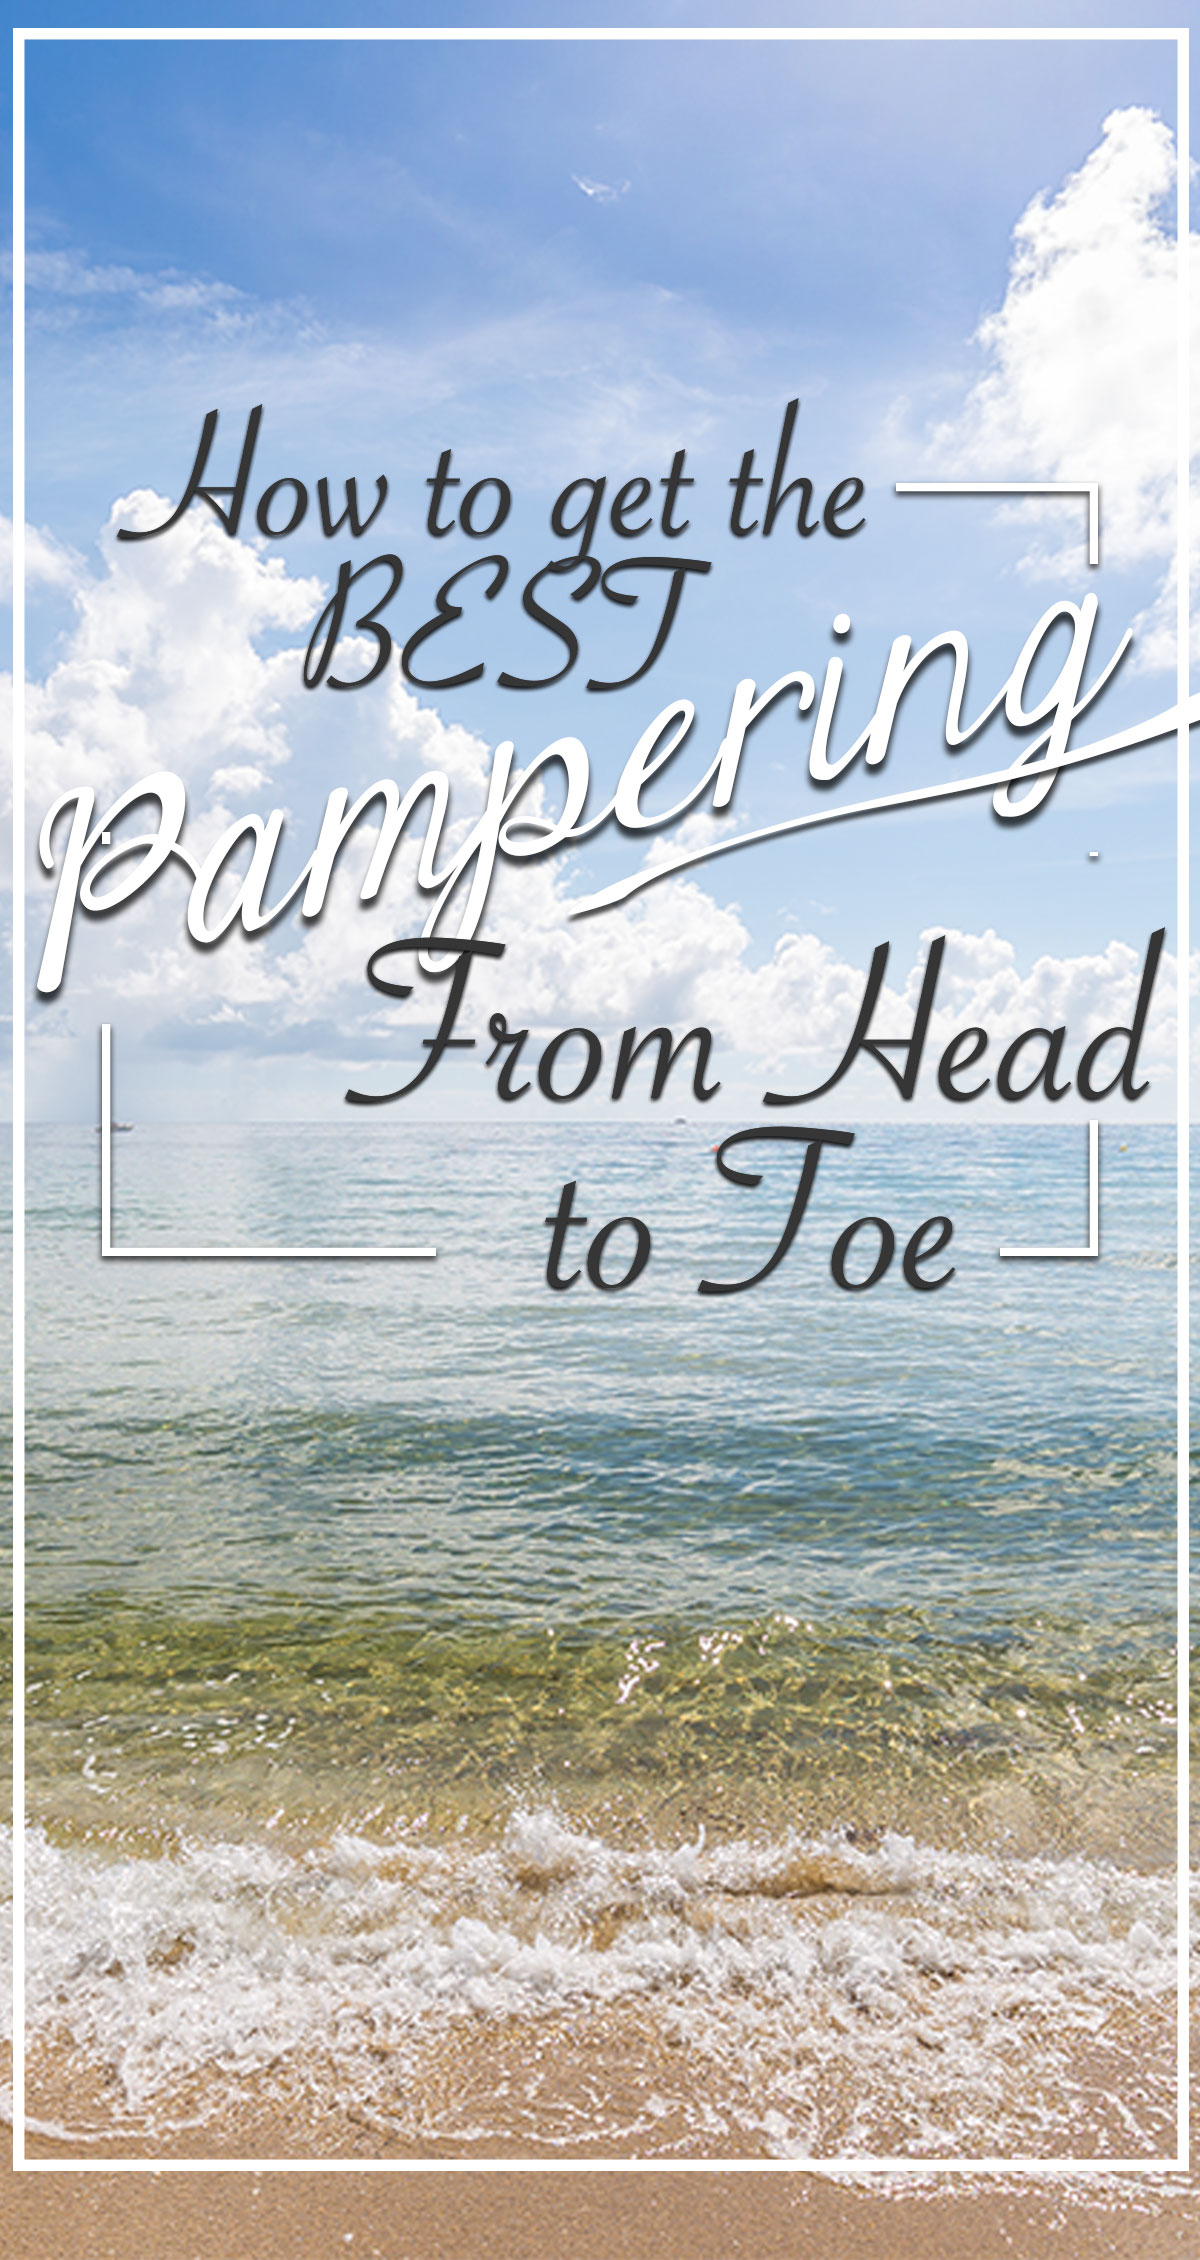 How to Get the Best Beachside Pampering from Head to Toe Pin